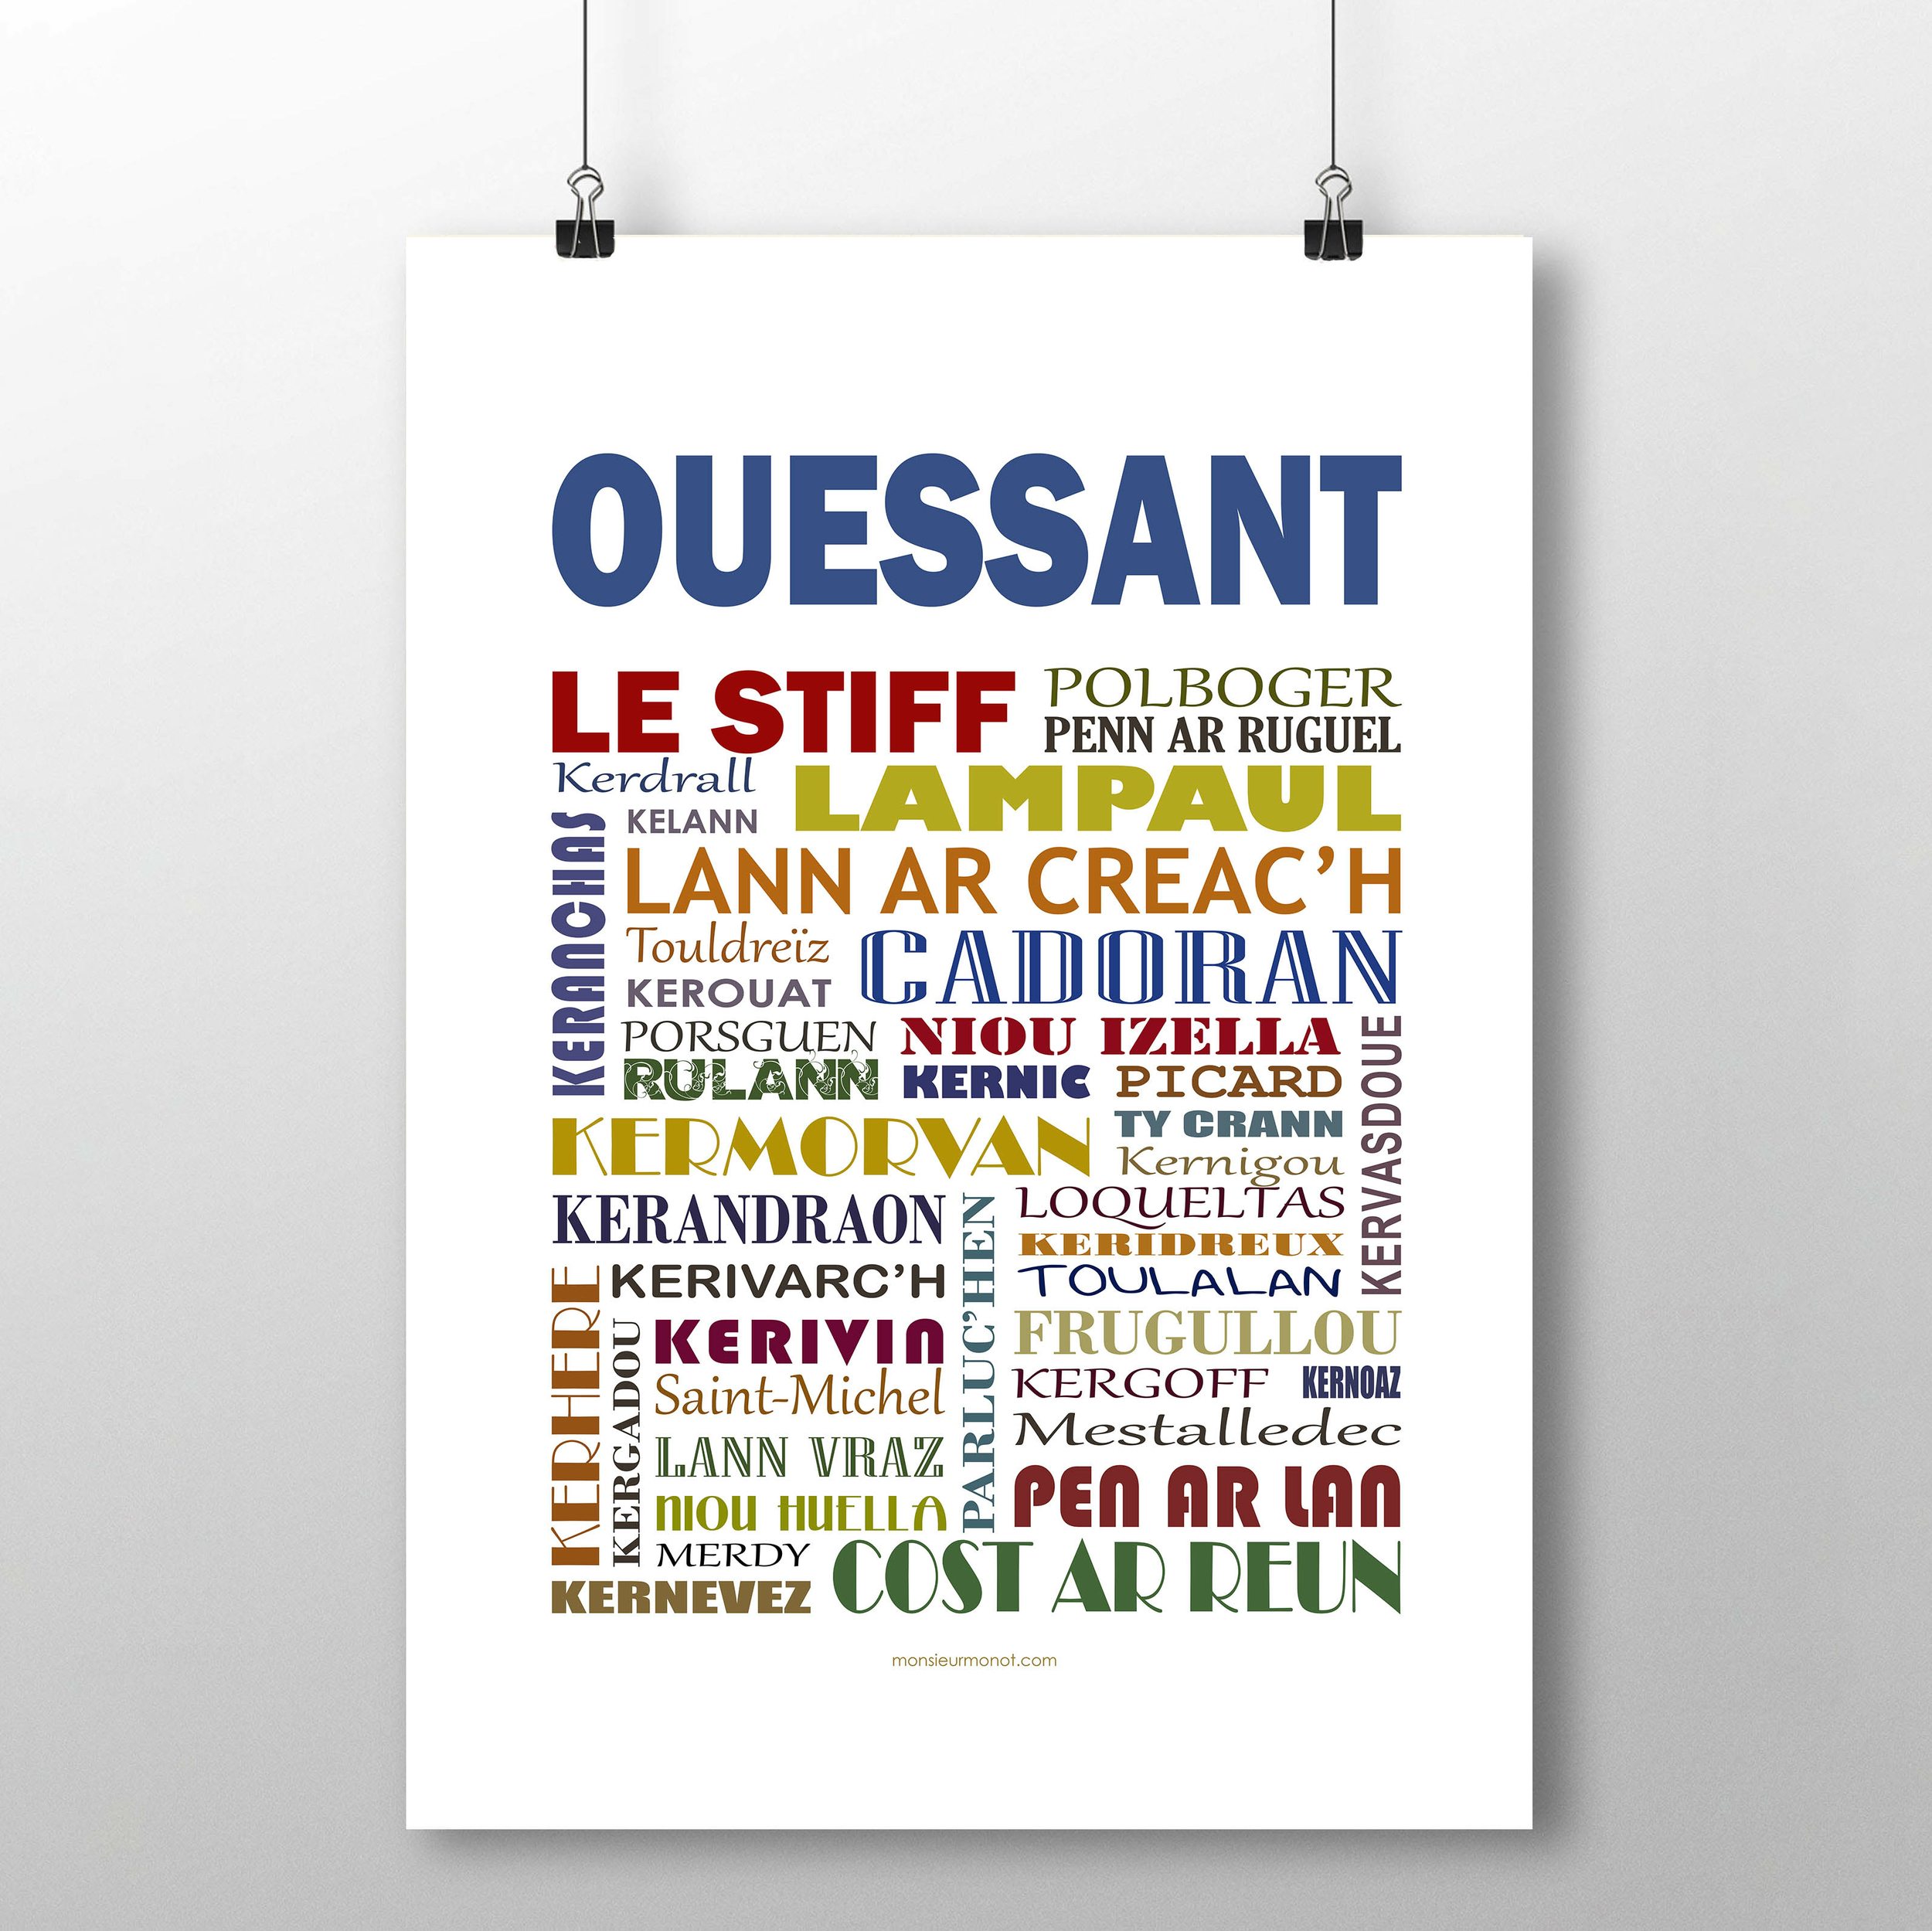 ouessant 3